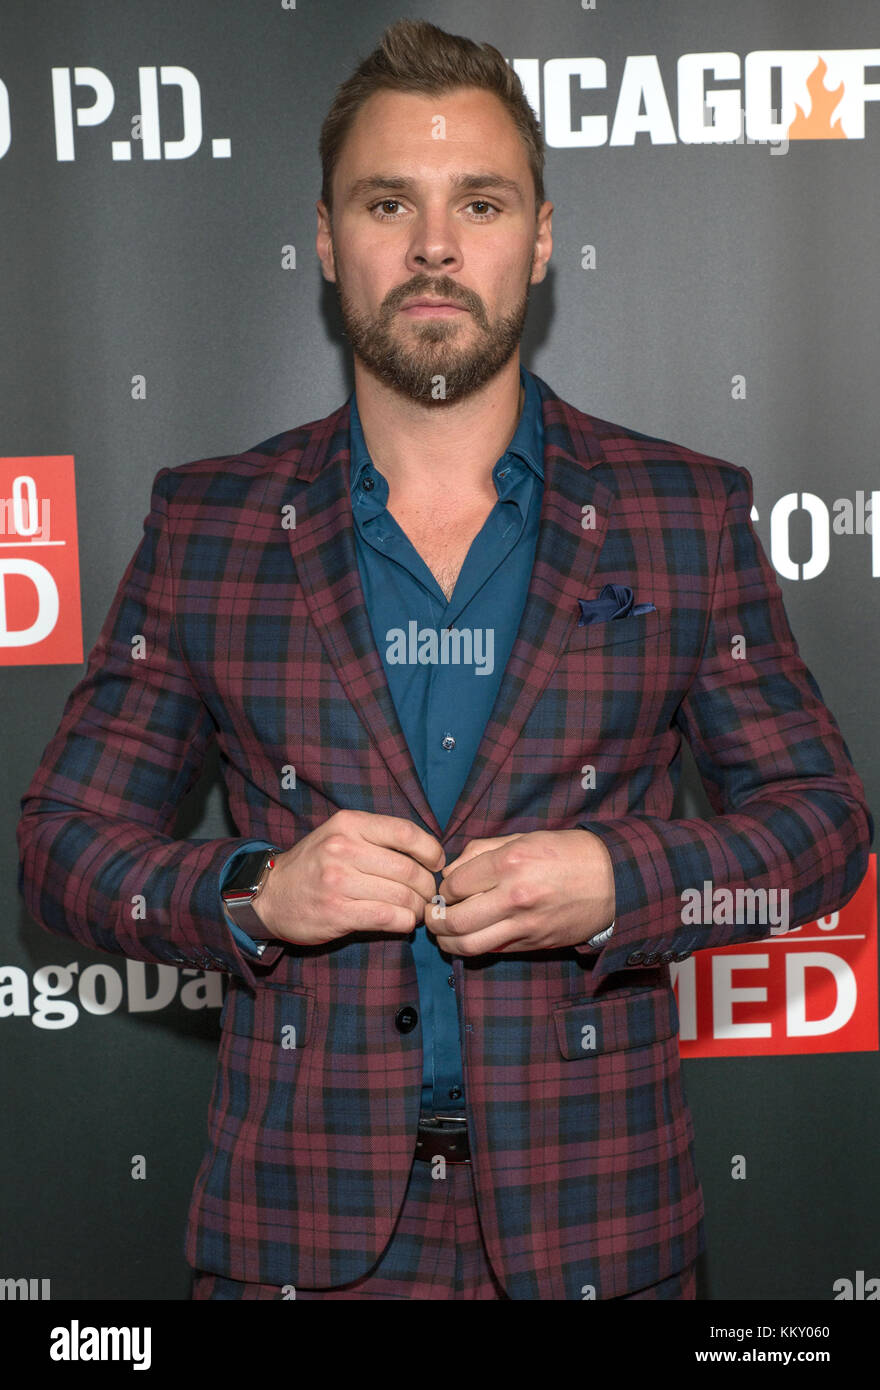 3rd annual NBC One Chicago Party featuring cast members from Chicago Fire, Chicago Med and Chicago P.D - Arrivals  Featuring: Patrick John Flueger Where: Chicago, Illinois, United States When: 31 Oct 2017 Credit: WENN Stock Photo